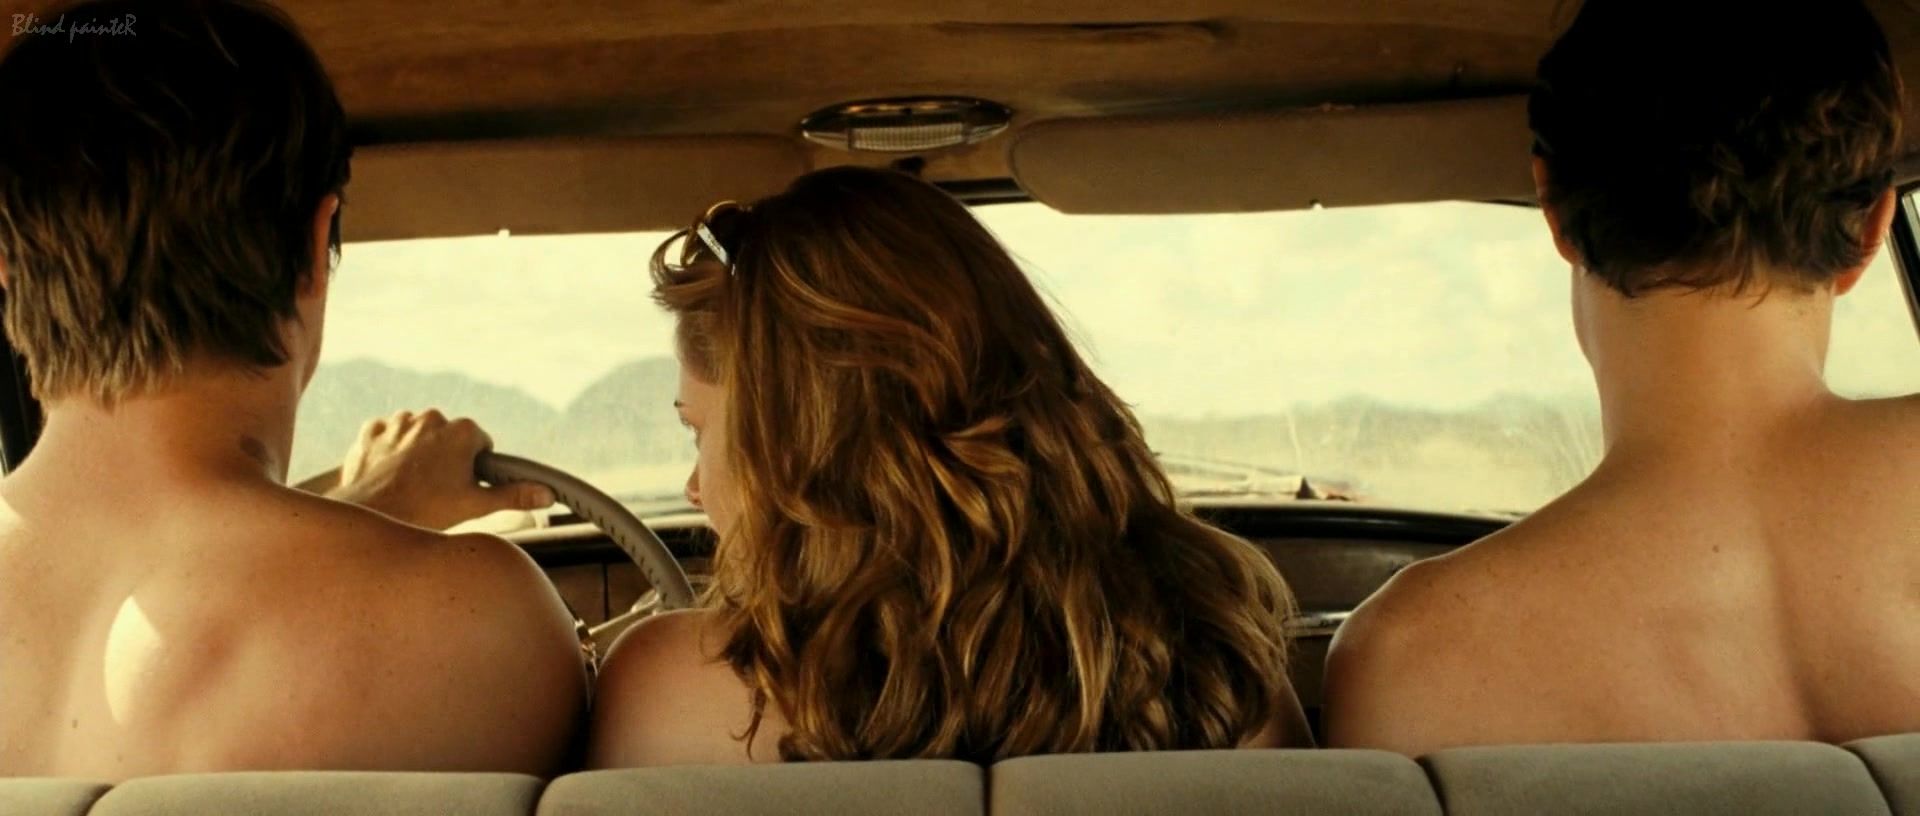 Pinay Kristen Stewart nude - On The Road S1E1 Indonesia